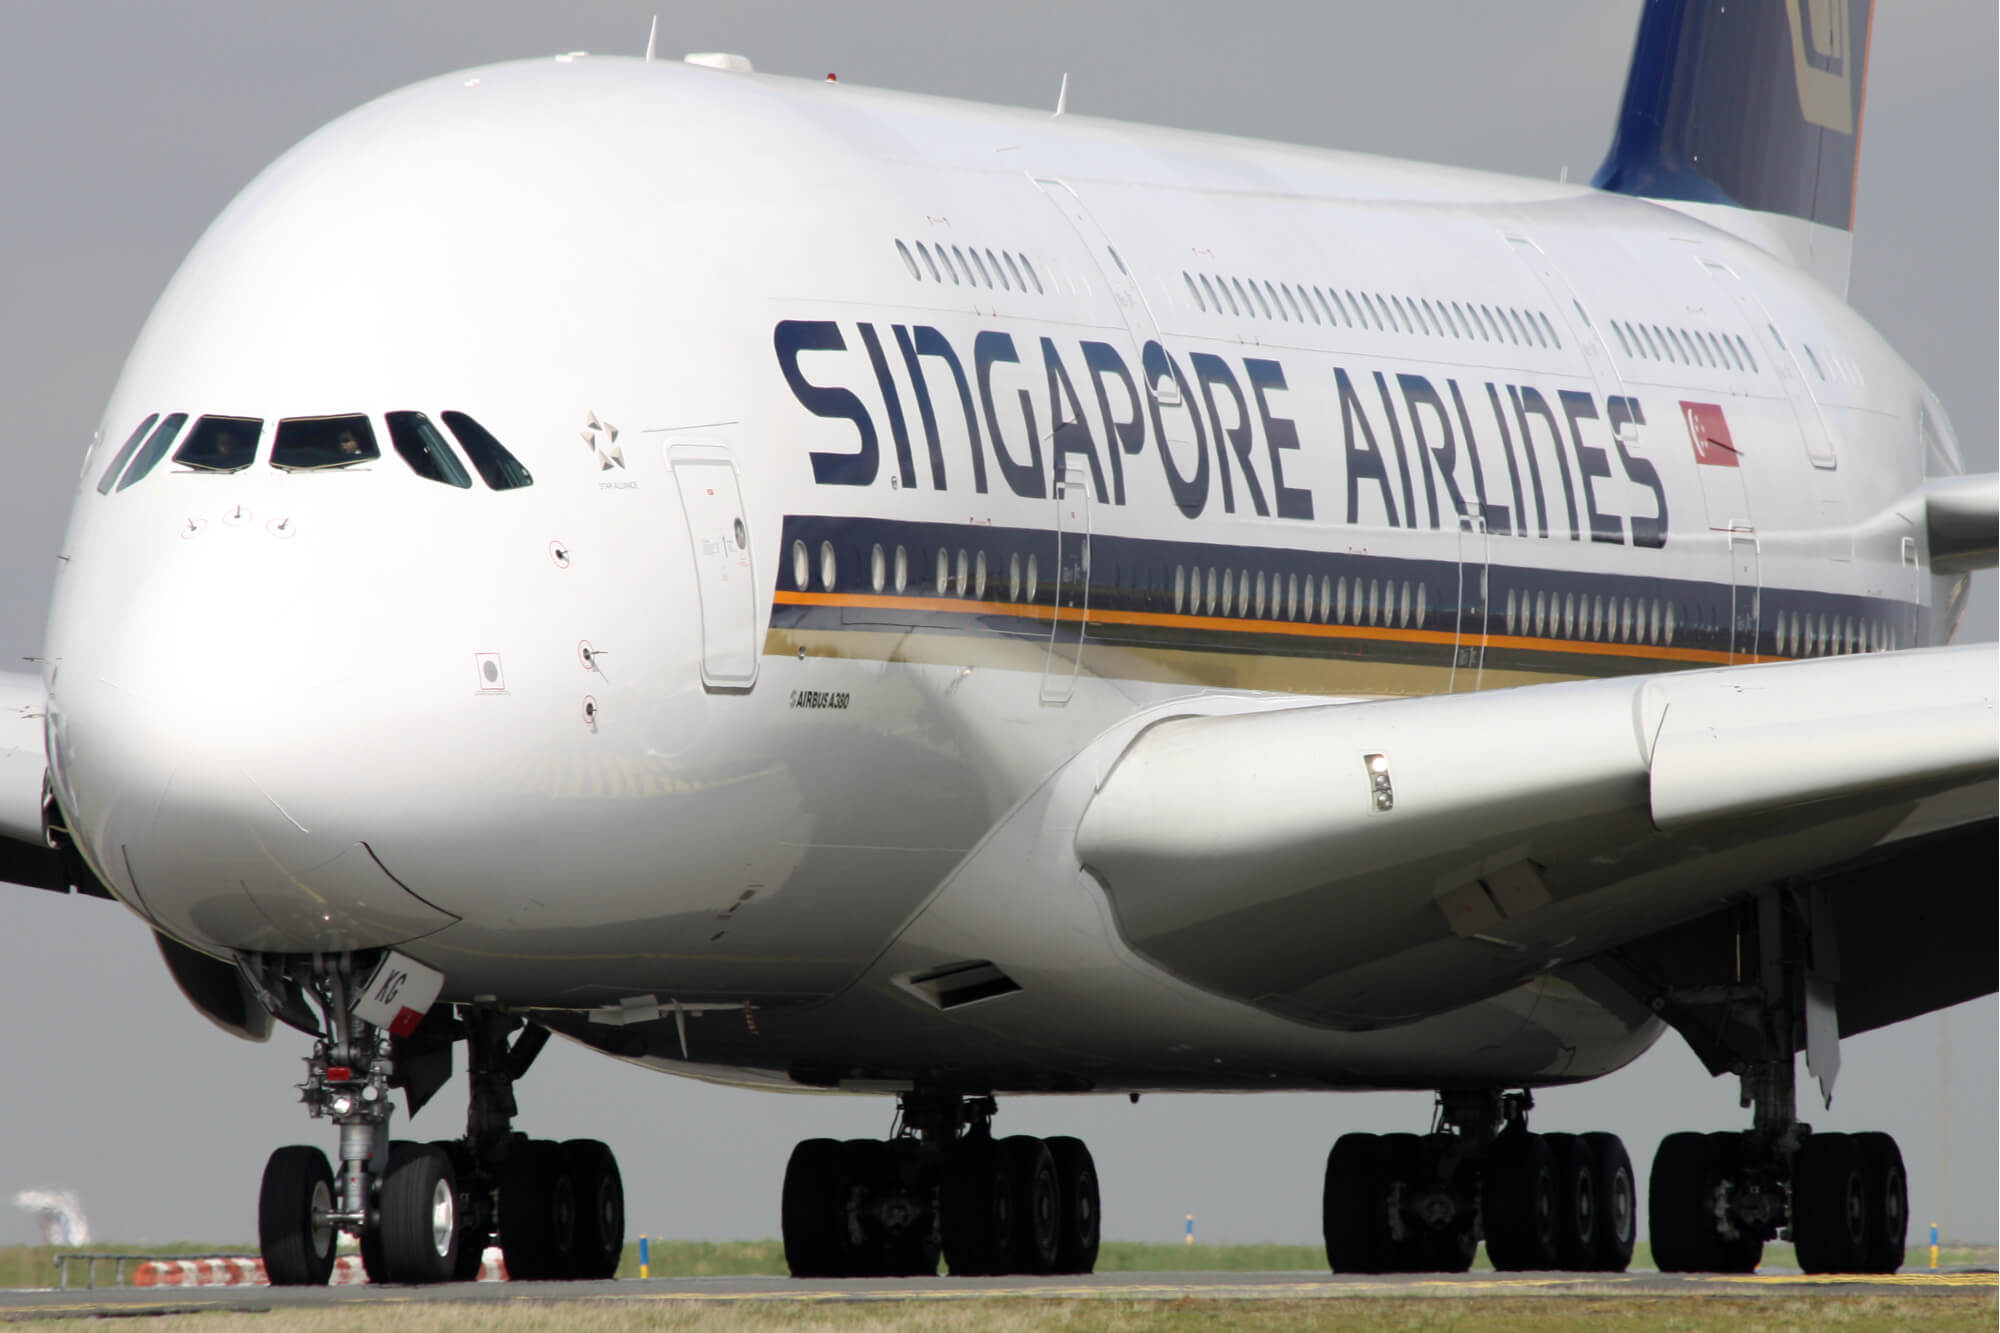 Singapore airlines a380 at cdg